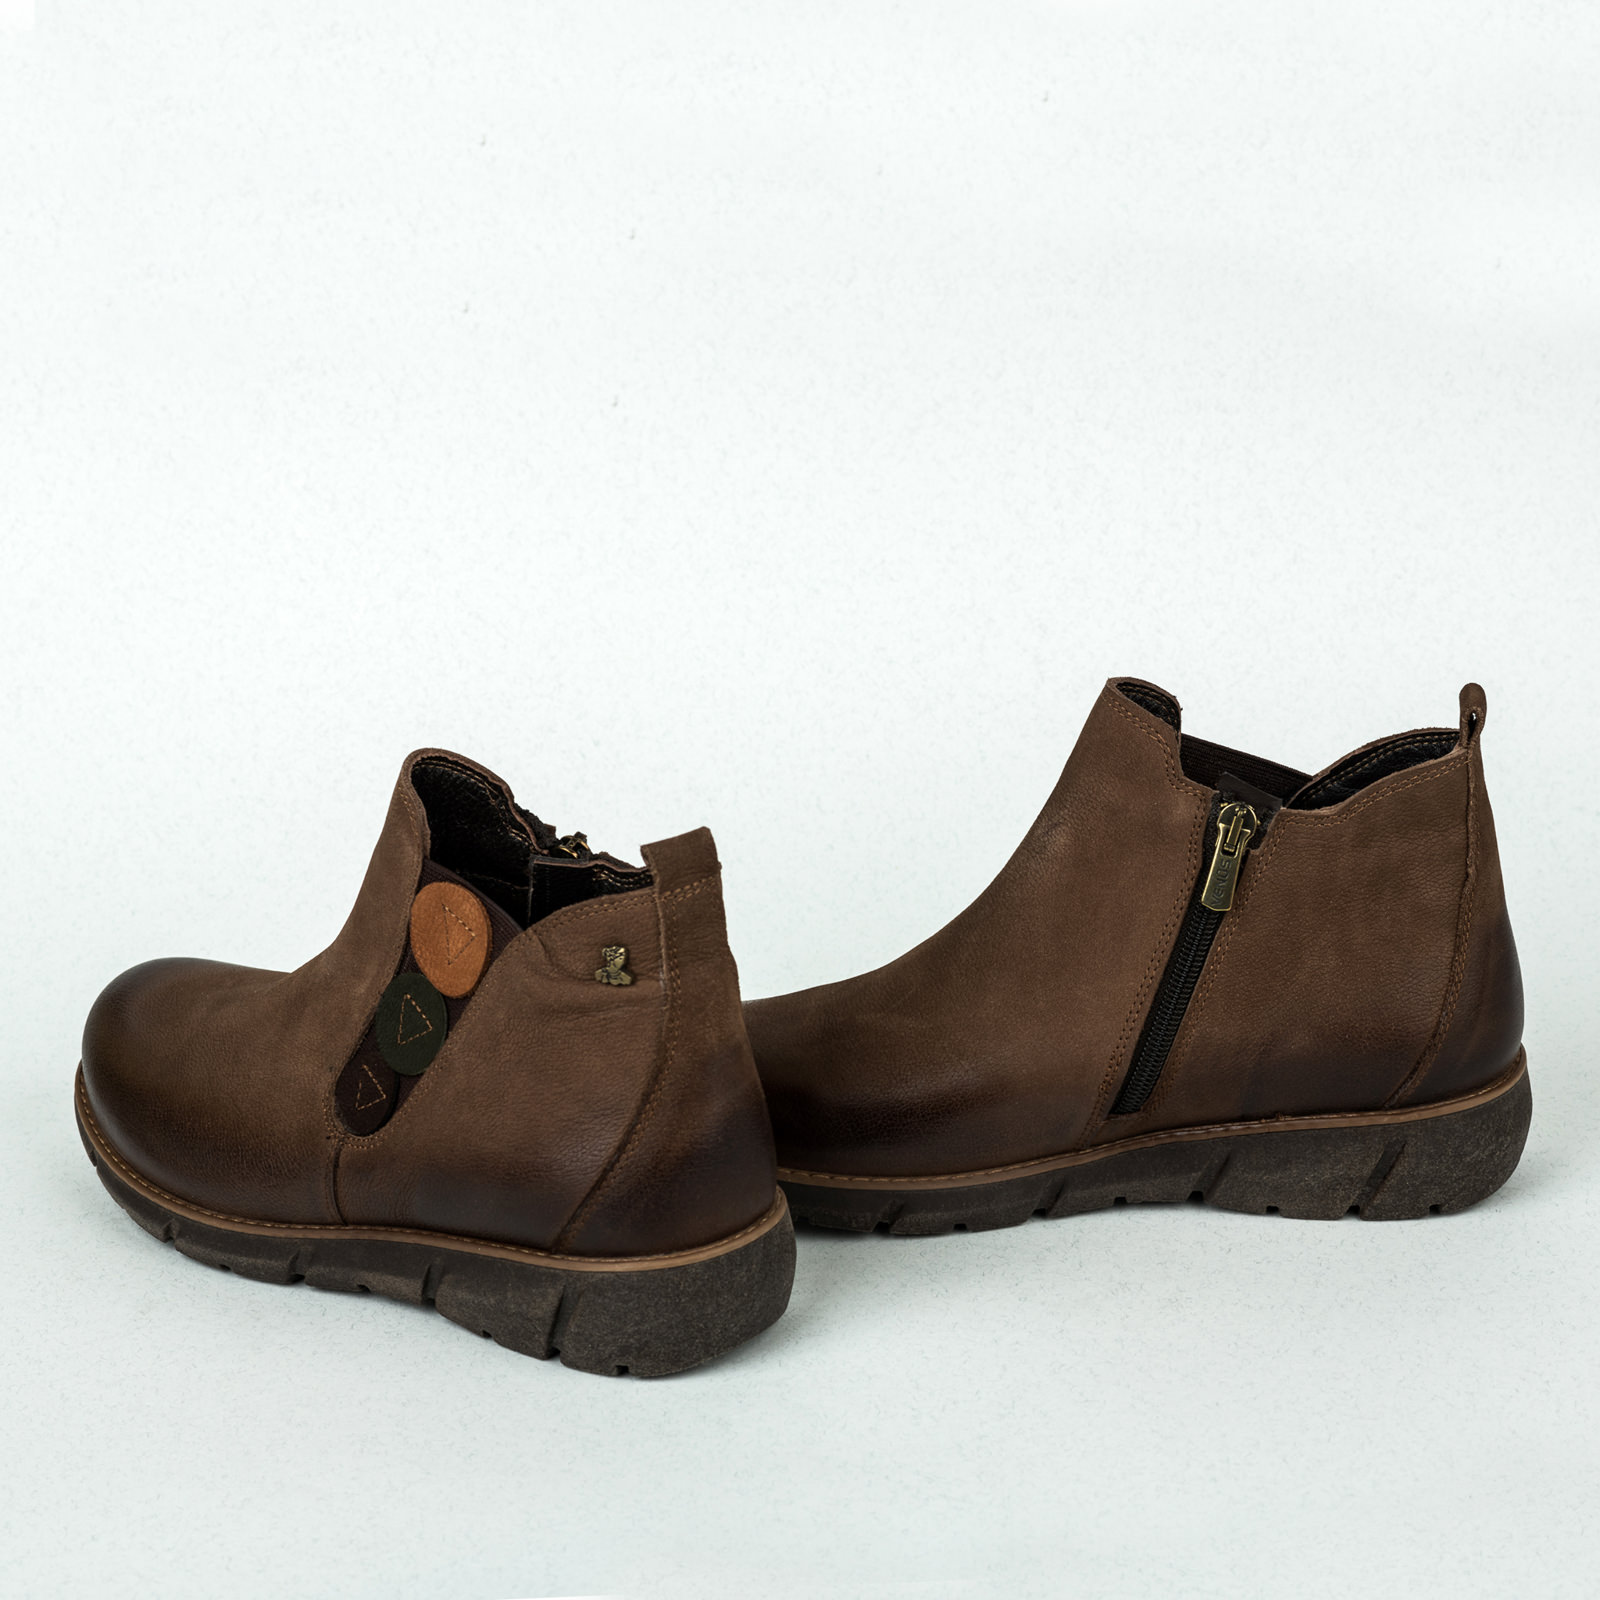 Leather ankle boots B070 - BROWN